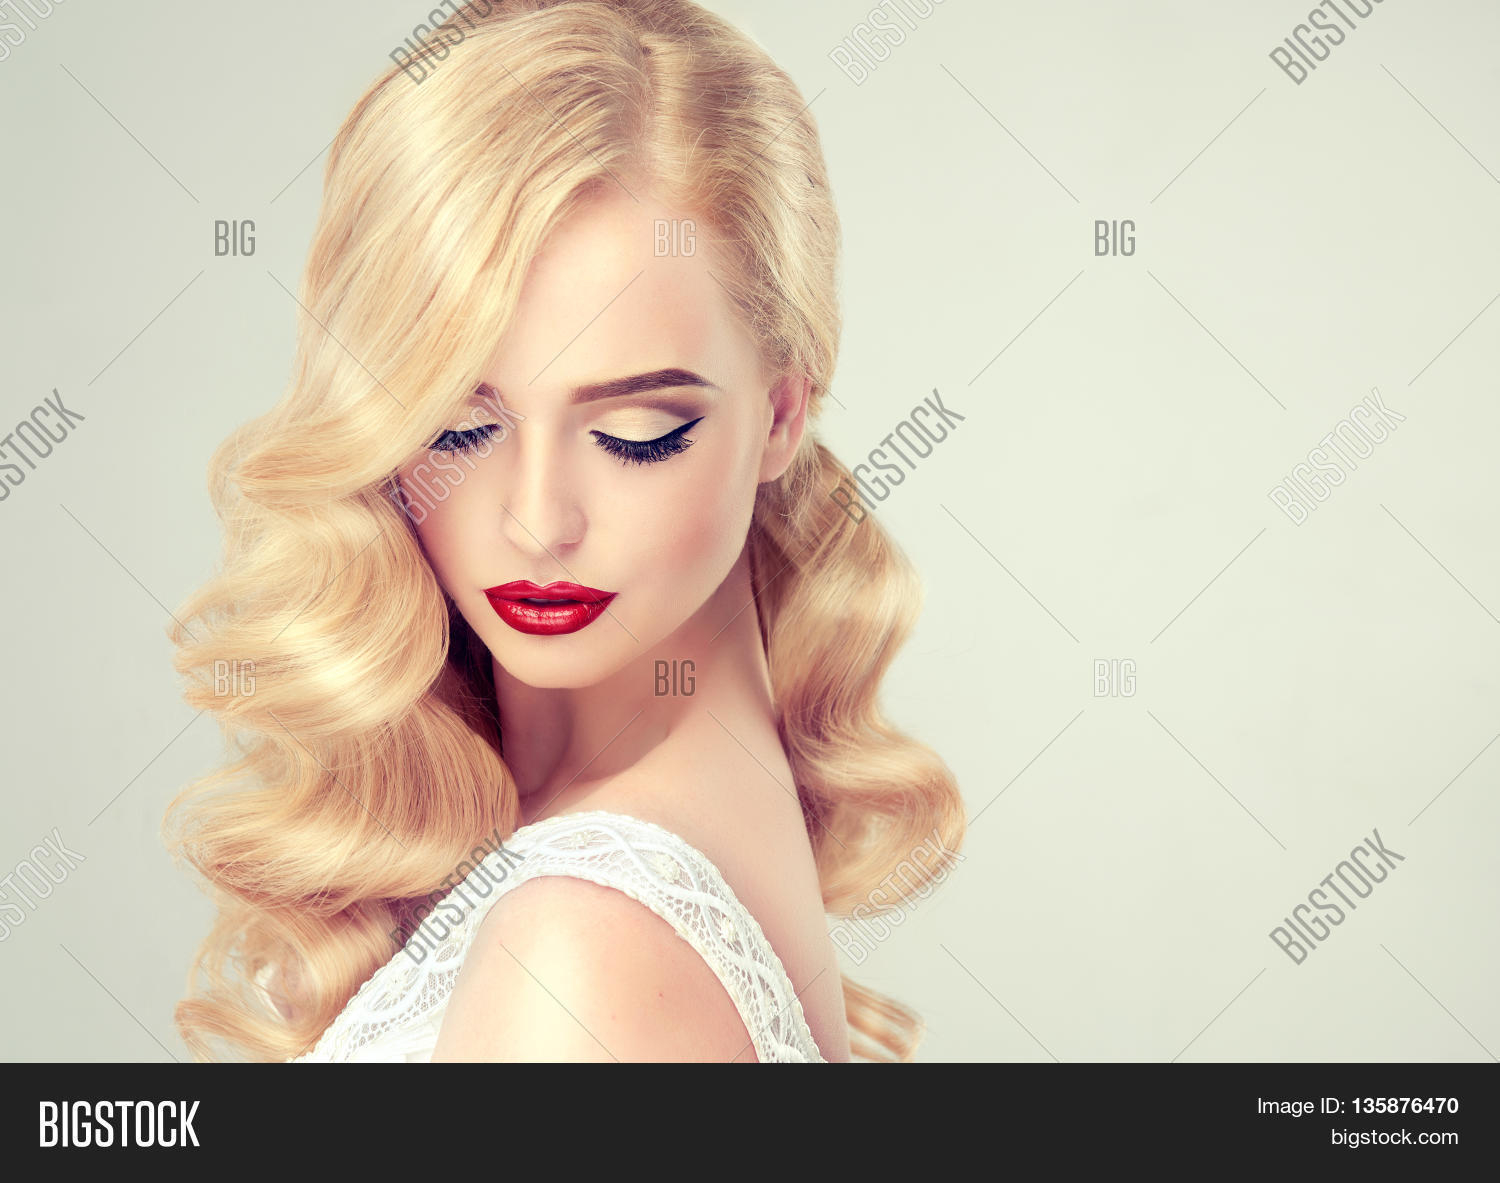 Makeup For Blondes With Blue Eyes Beautiful Blonde Girl Image Photo Free Trial Bigstock